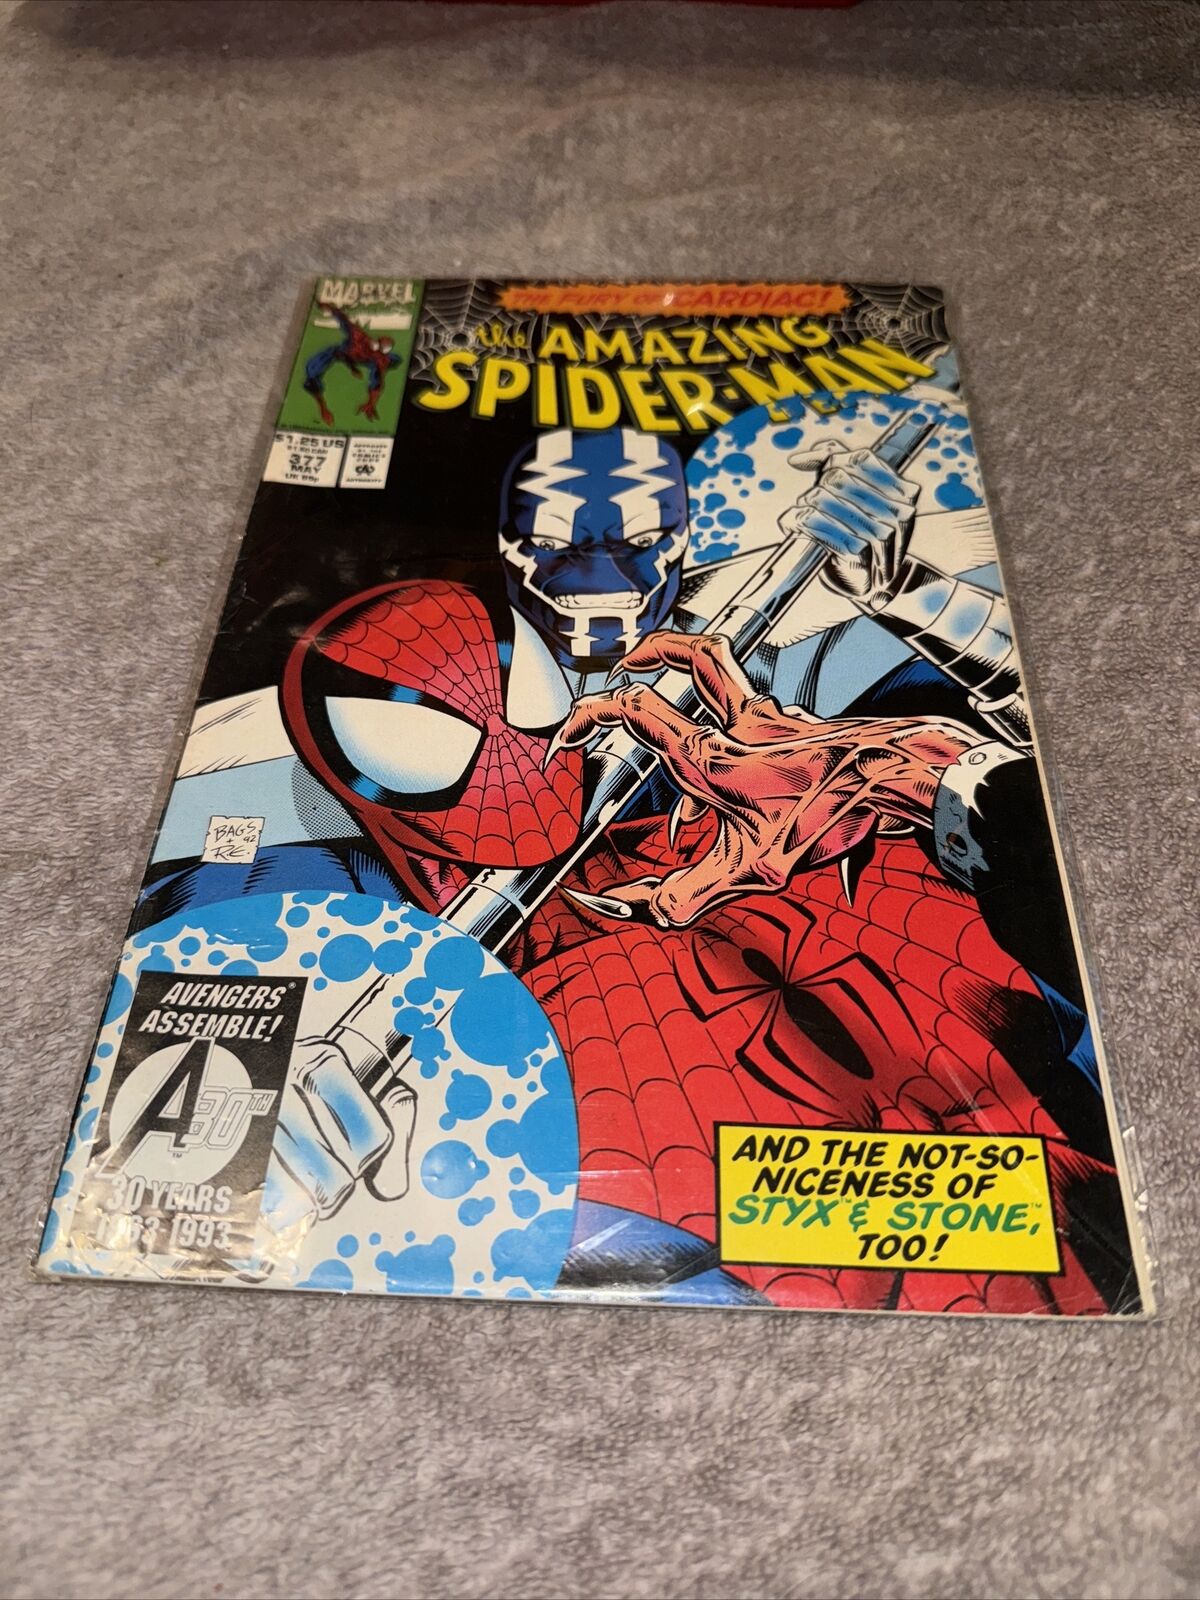 The Amazing Spiderman #377 - May 1993 - Vol.1        (4158)